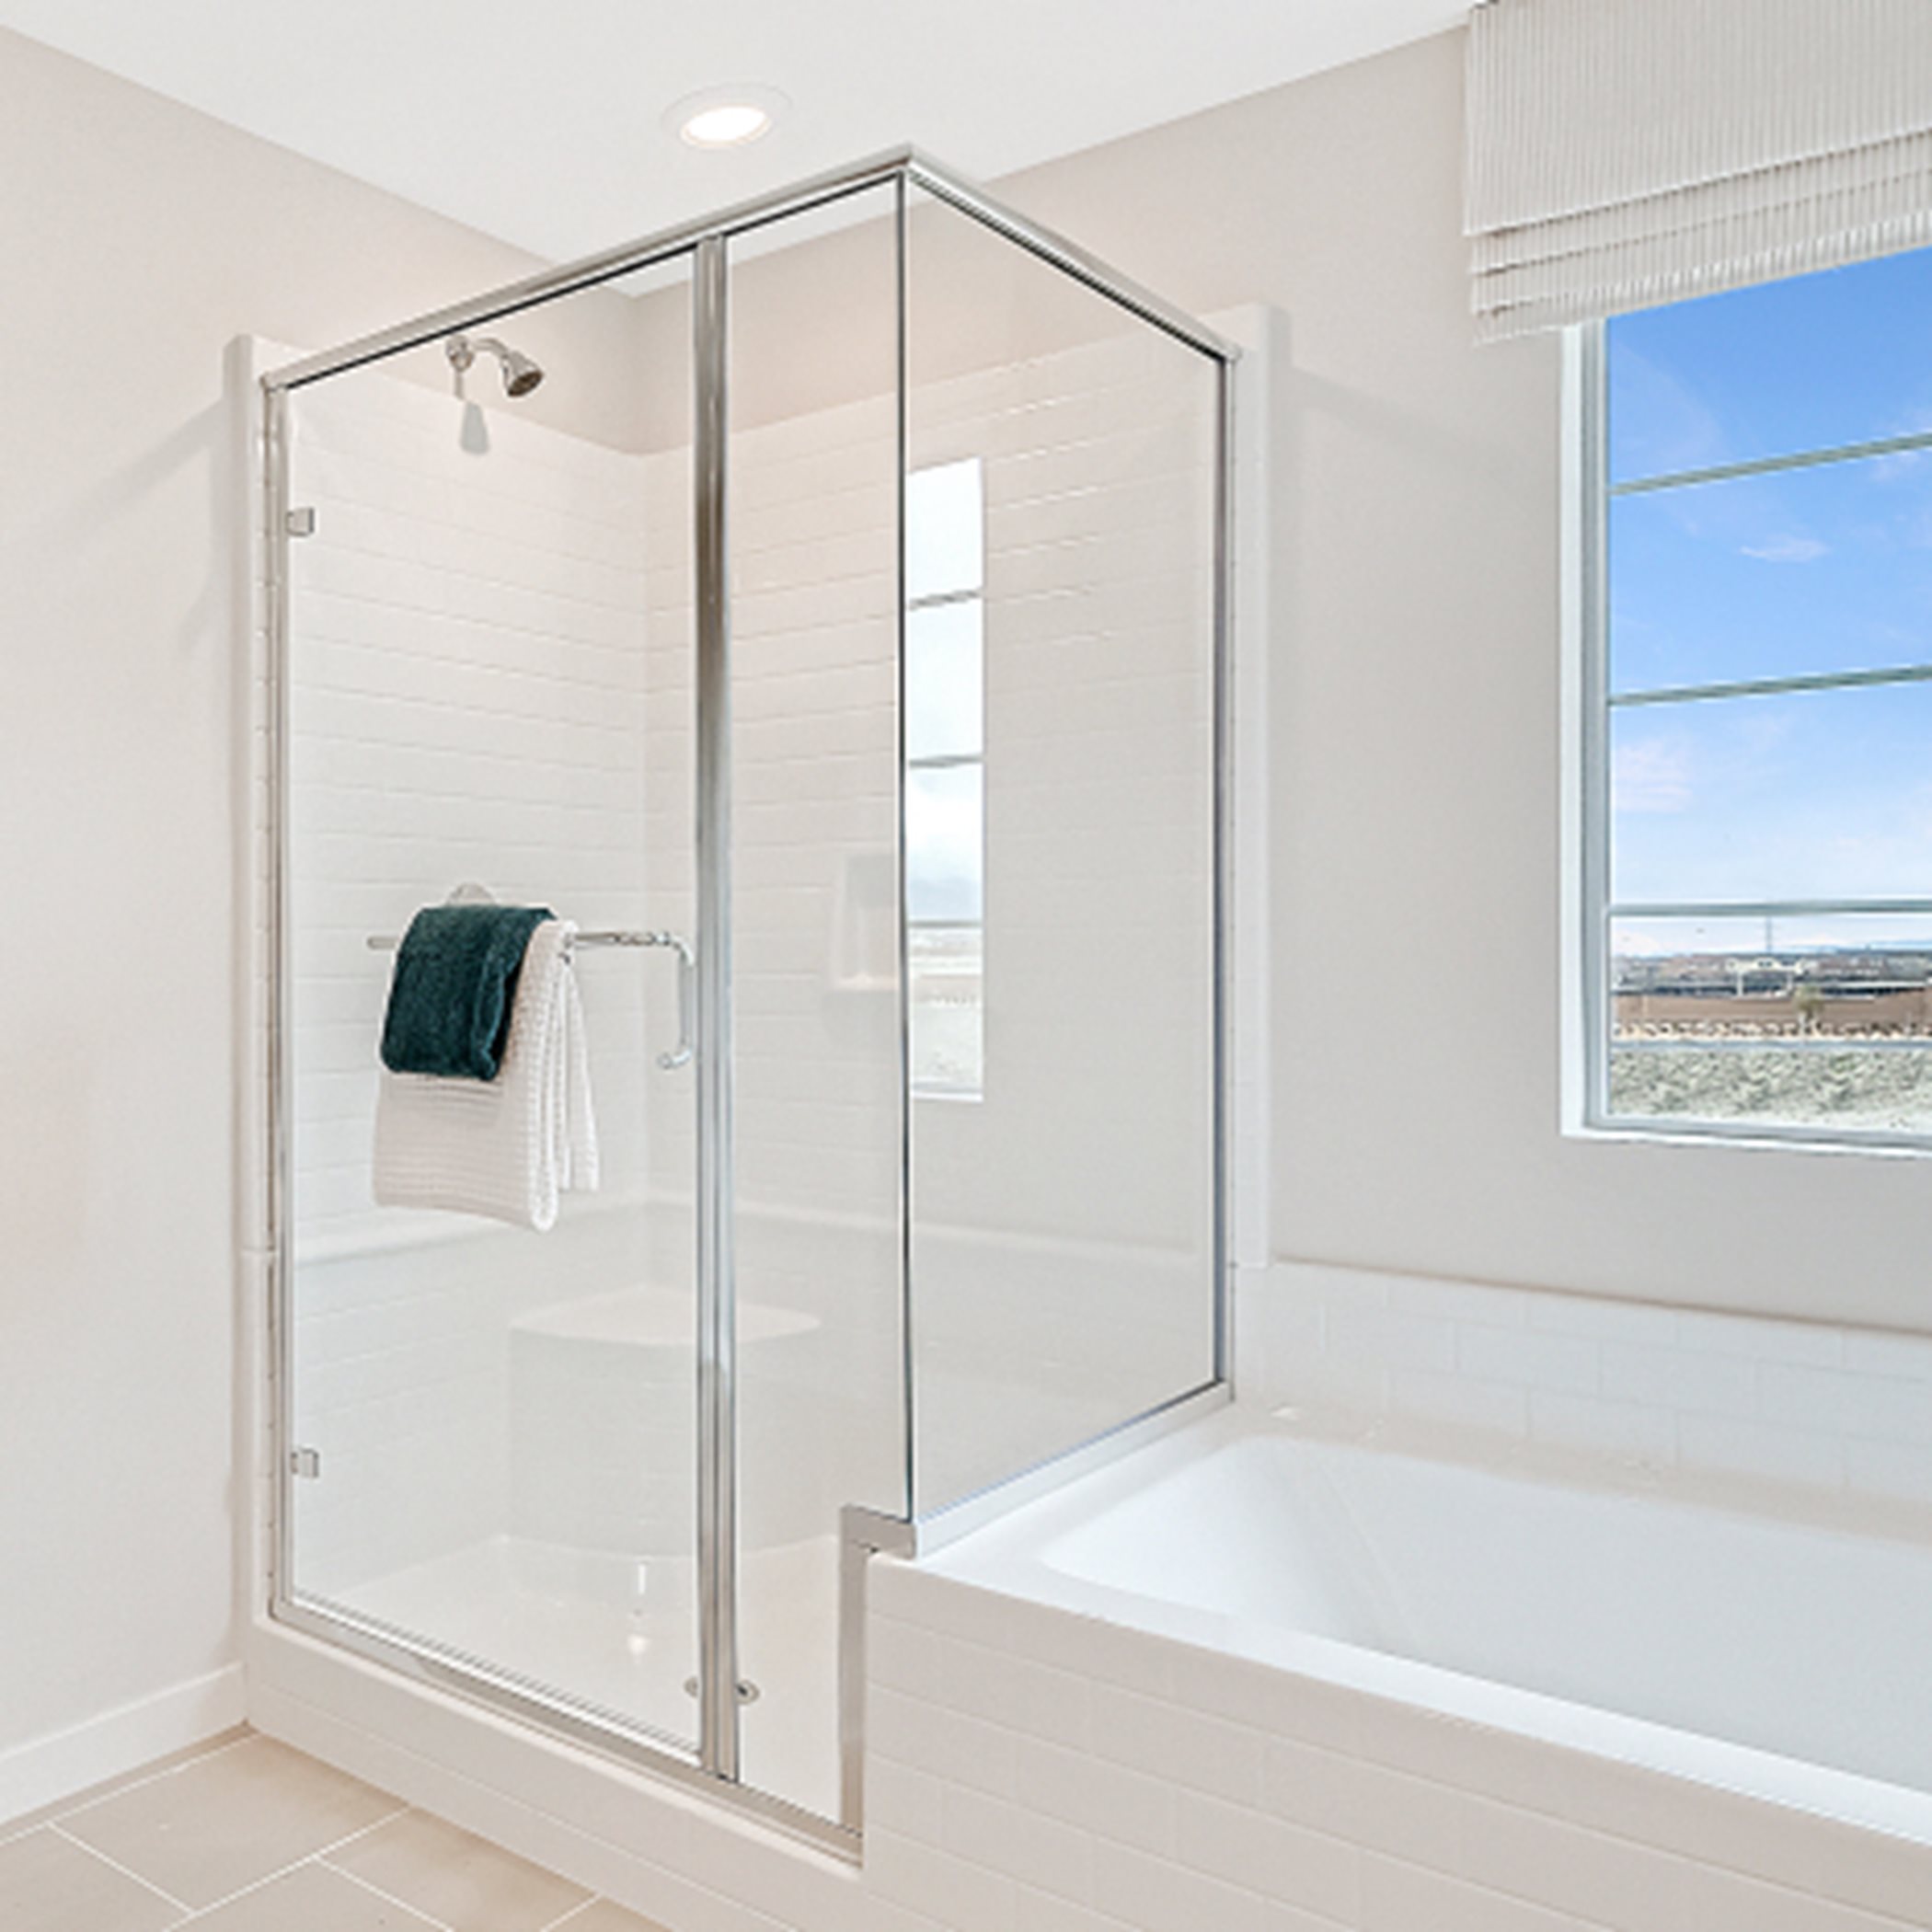 Owner's separate shower and tub